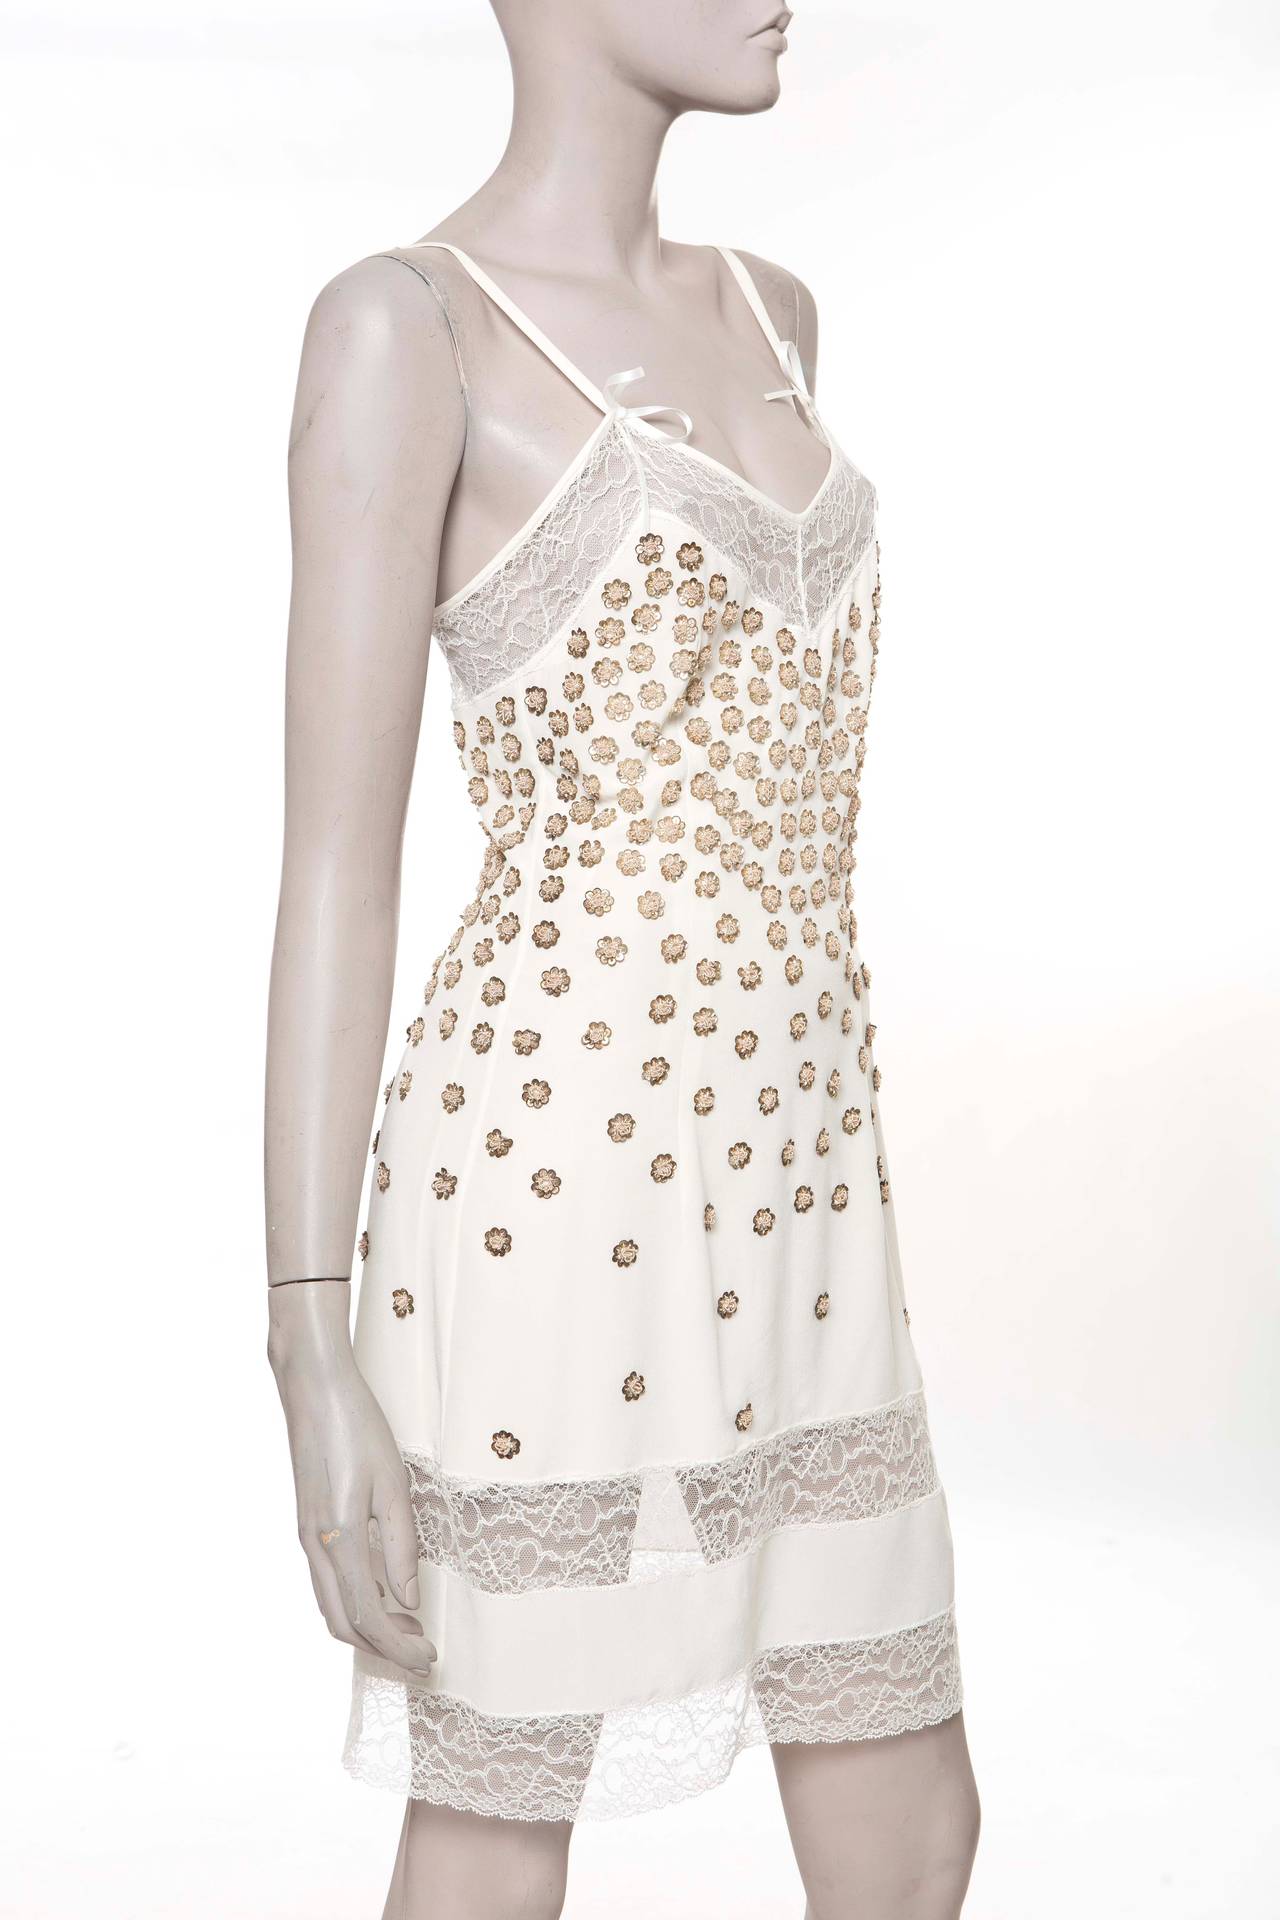 John Galliano for  Christian Dior, silk sleeveless slip dress with V-neck, lace trim, floral sequin appliqués throughout and side French button closures.

Measurements: Bust 32”, Waist 28”, Hip 34”, Length 38”
Fabric Content: 100% Silk; Lace: